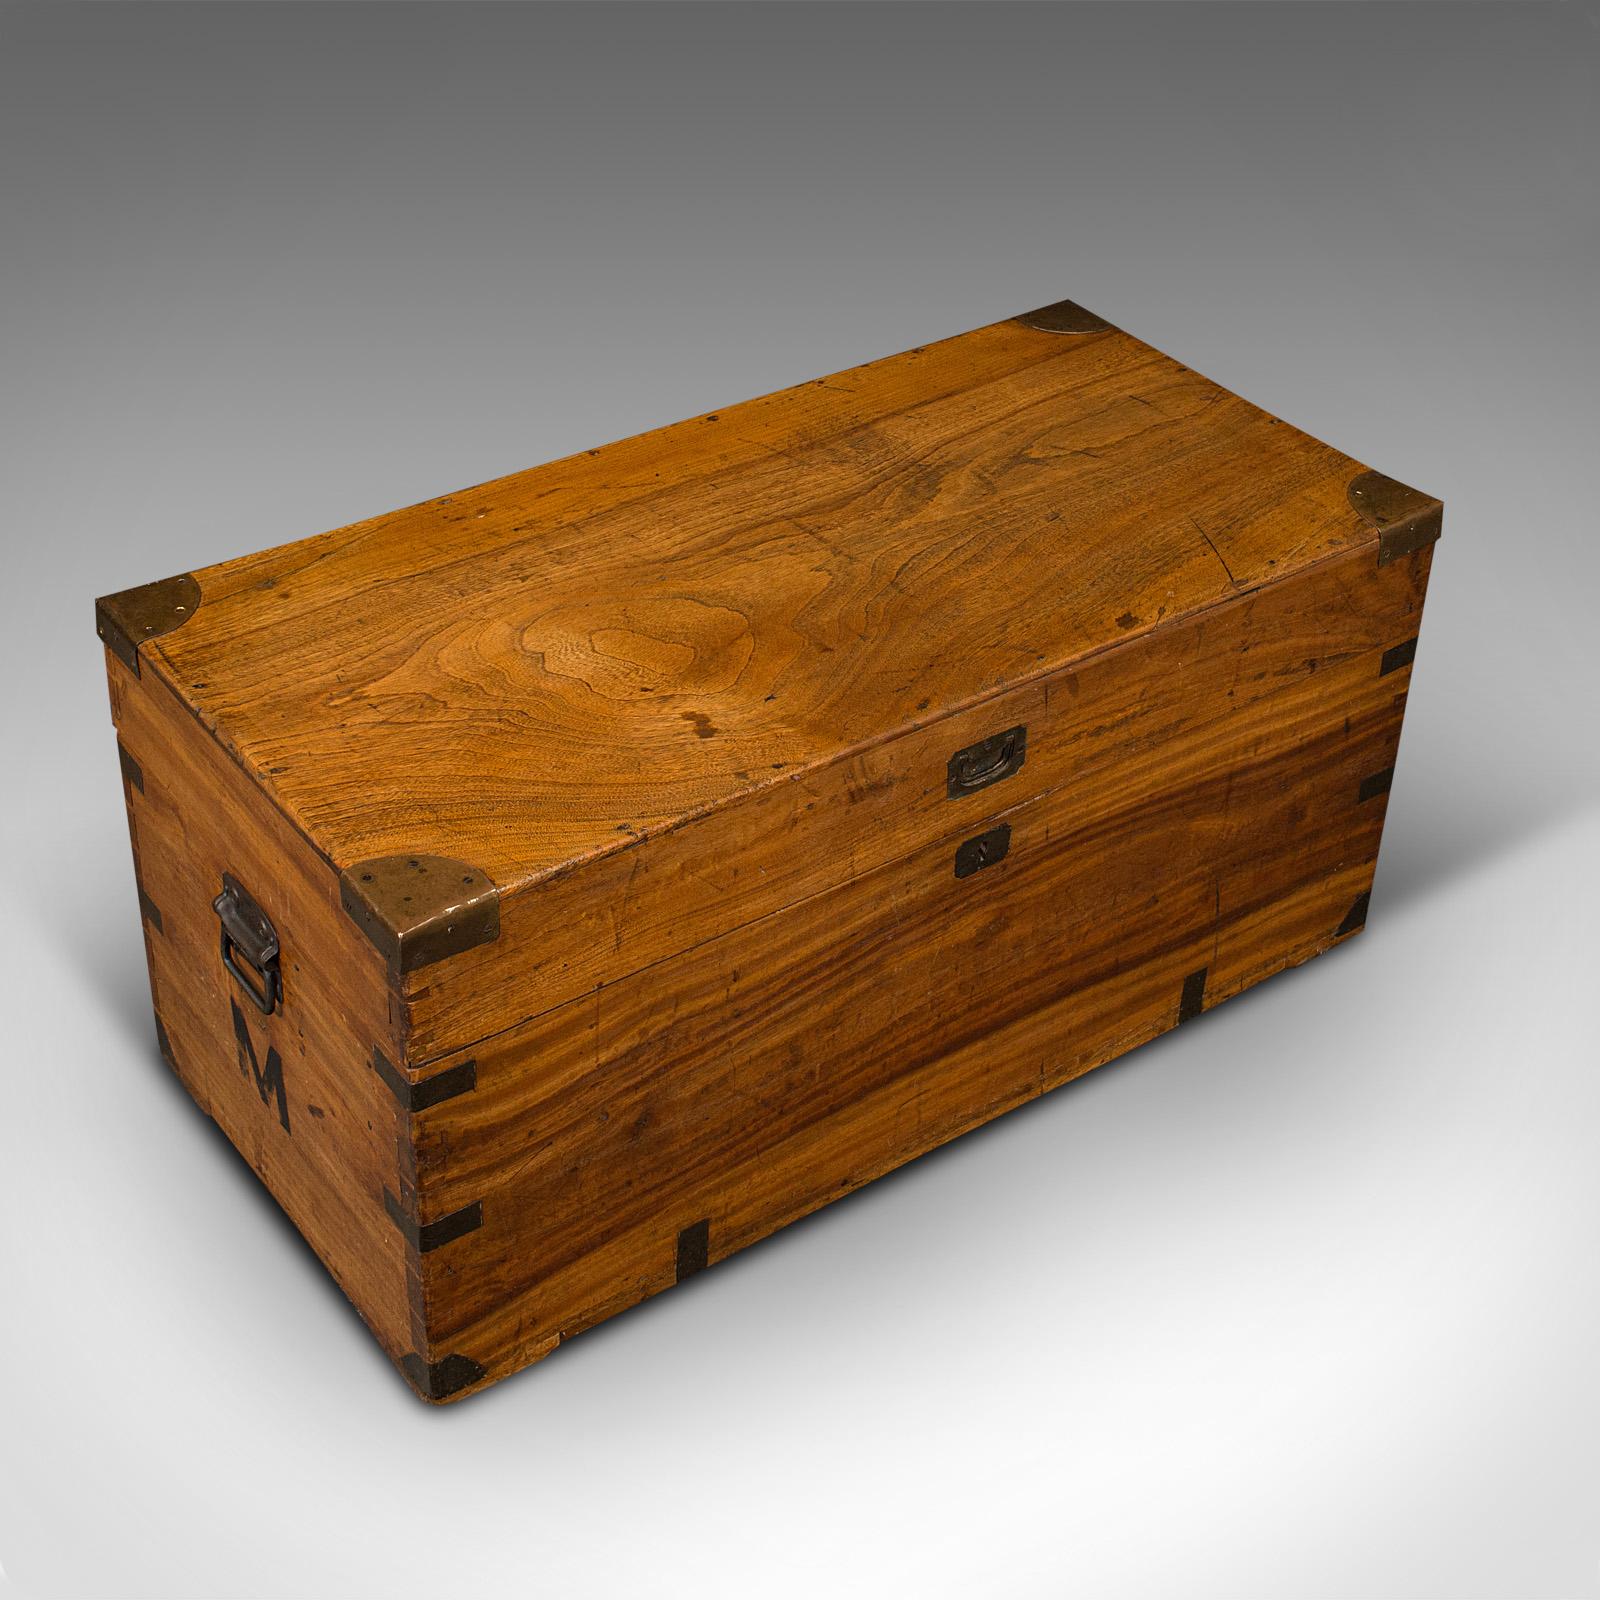 20th Century Vintage Campaign Chest, English, Camphorwood, Military Travel Trunk, Circa 1930 For Sale